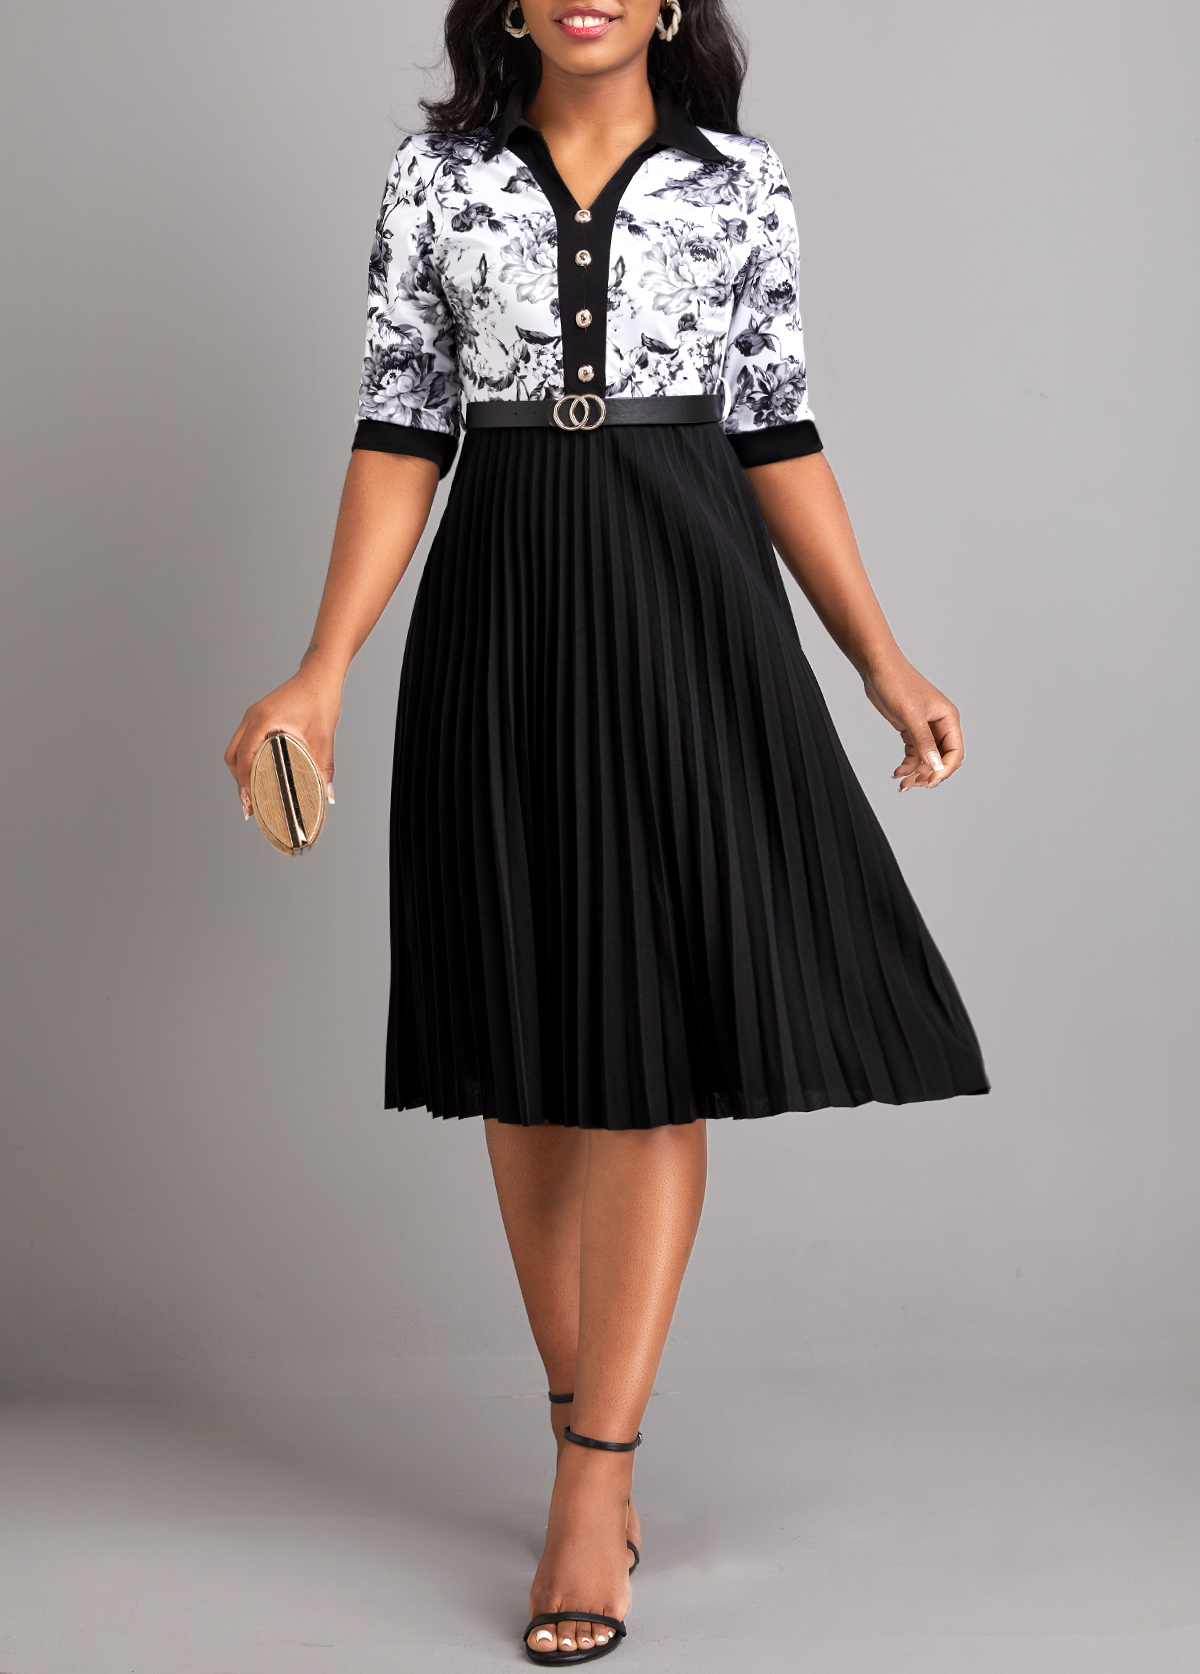 Floral Print Pleated Belted Black Shirt Collar Dress